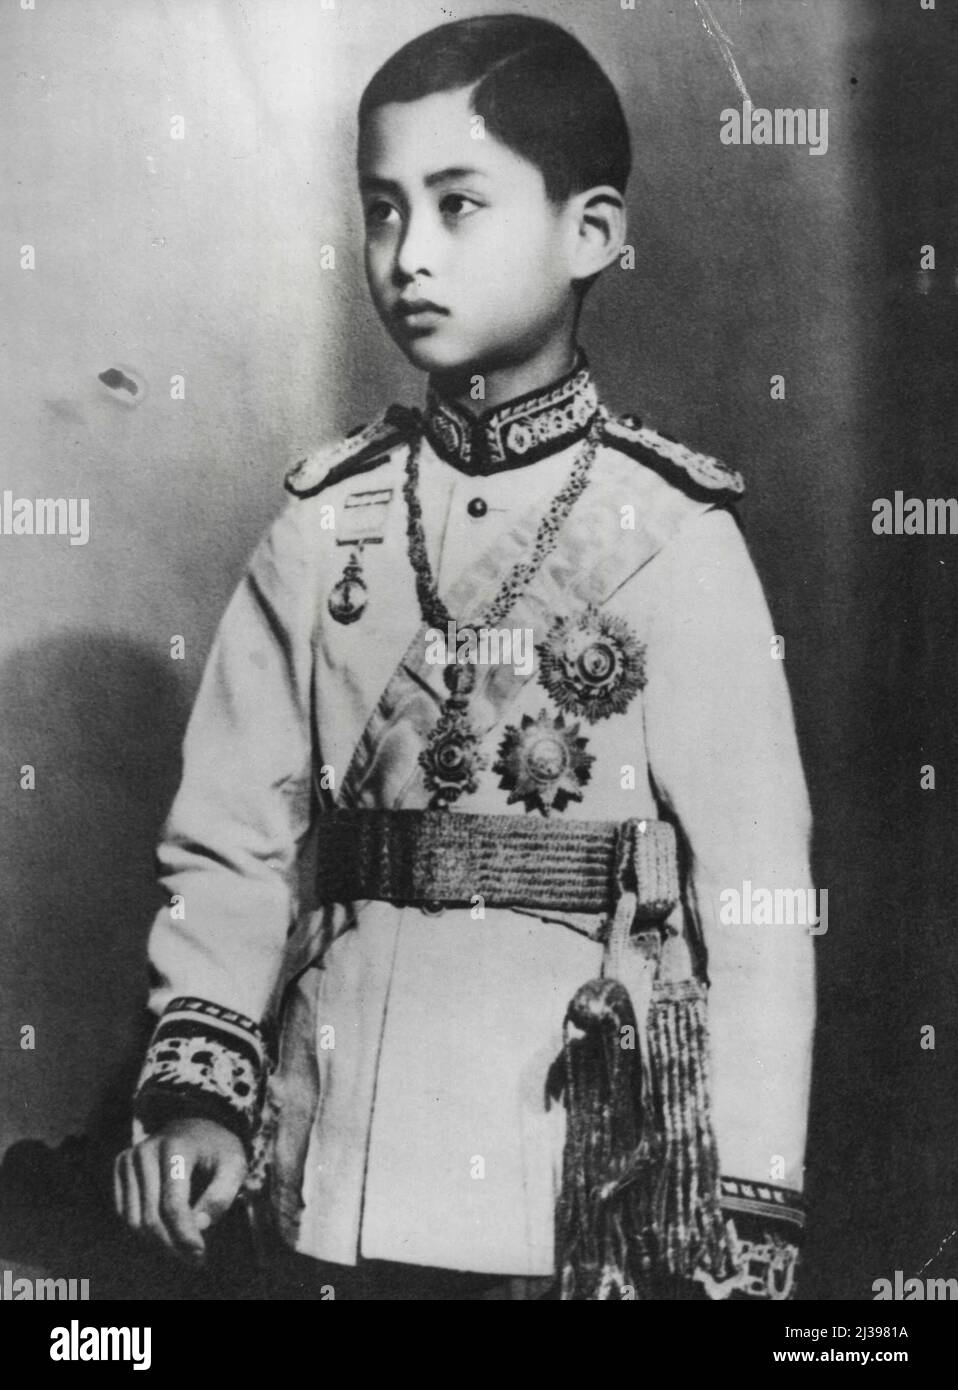 Siam's Boy's King - His Majesty, King Ananda Mahidol, age 13, lives in Switzerland while his kingdom of Siam is Administered by a regency. At the helm of his country is primer Col. Phya Phahol, an Army man who Eliminated much of the Royal Payroll and created constitutional government. King Anada, however, will assume the throne when the late Prince Mahidol, his father, was a Harvard Student, Anada lived at Cambridge, Mass., 1926 to 1928. October 05, 1938. (Photo by Associated Press Photo). Stock Photo